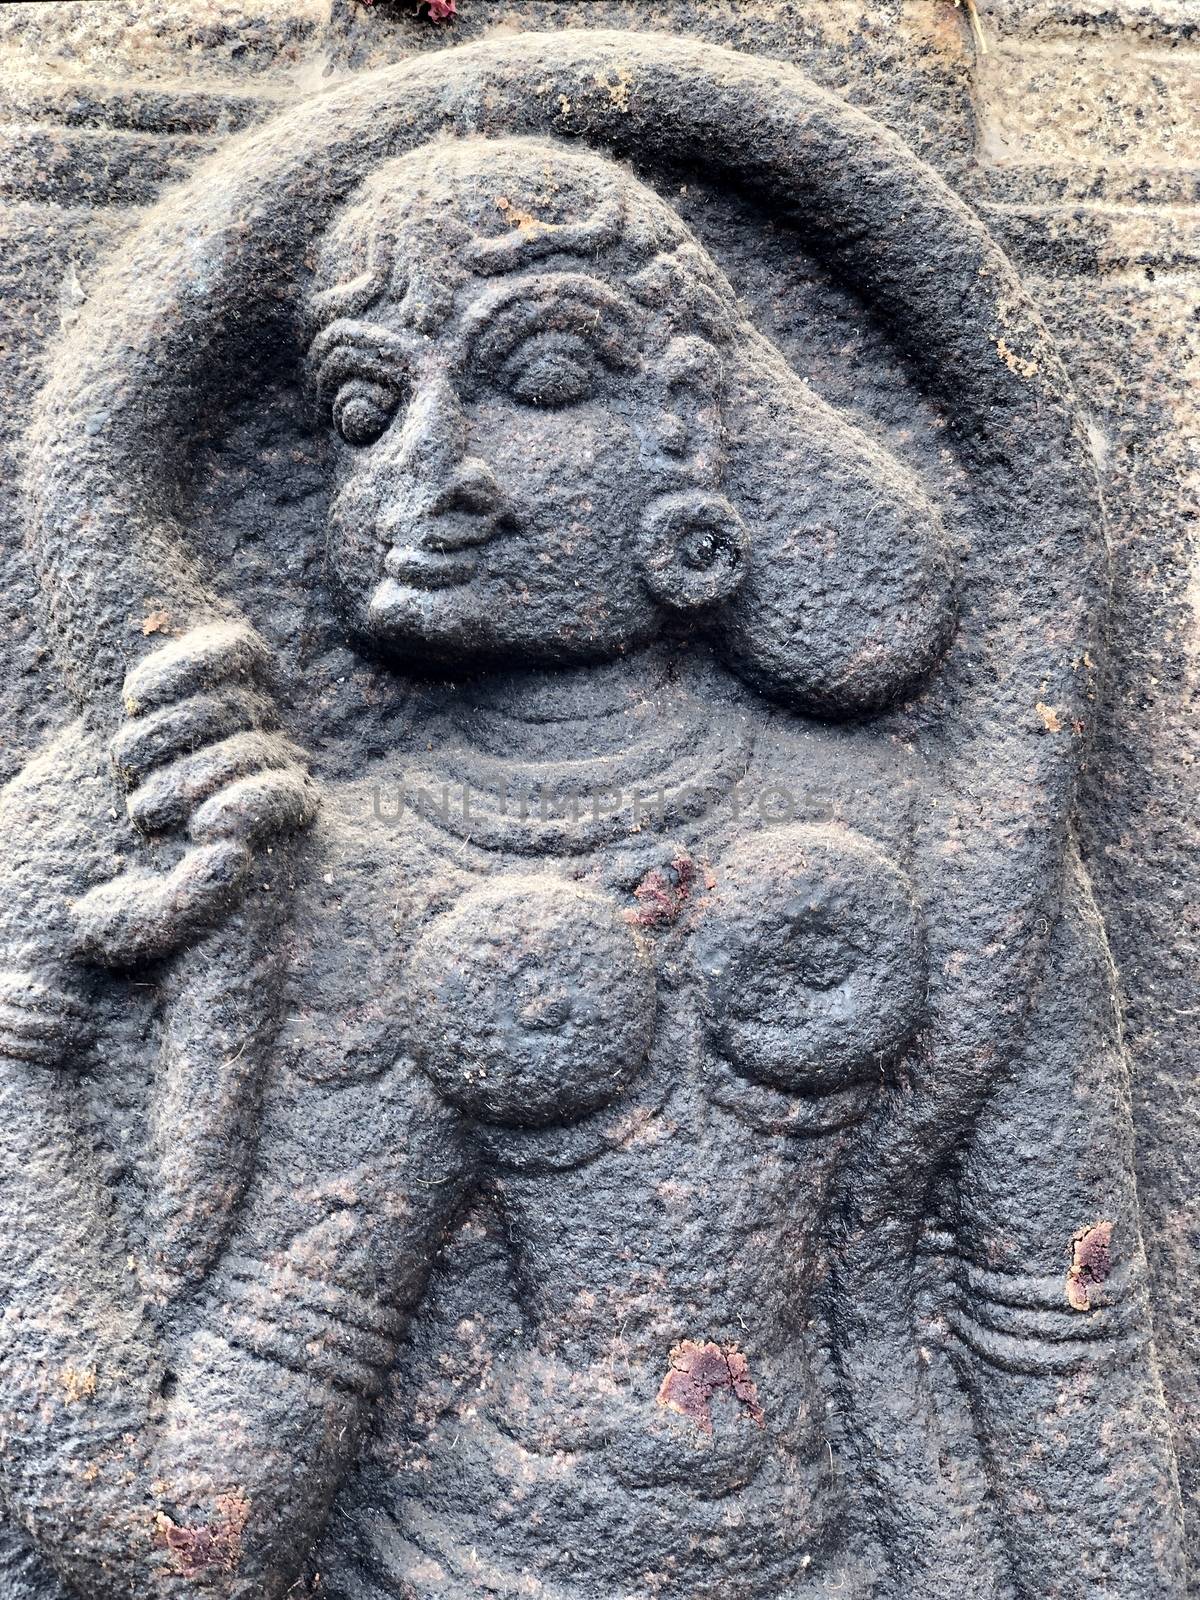 Women with beautiful hair decoration sculpture. Bas relief sculpture carved in the stone walls at Shiva temple in Tamil nadu by prabhakaran851